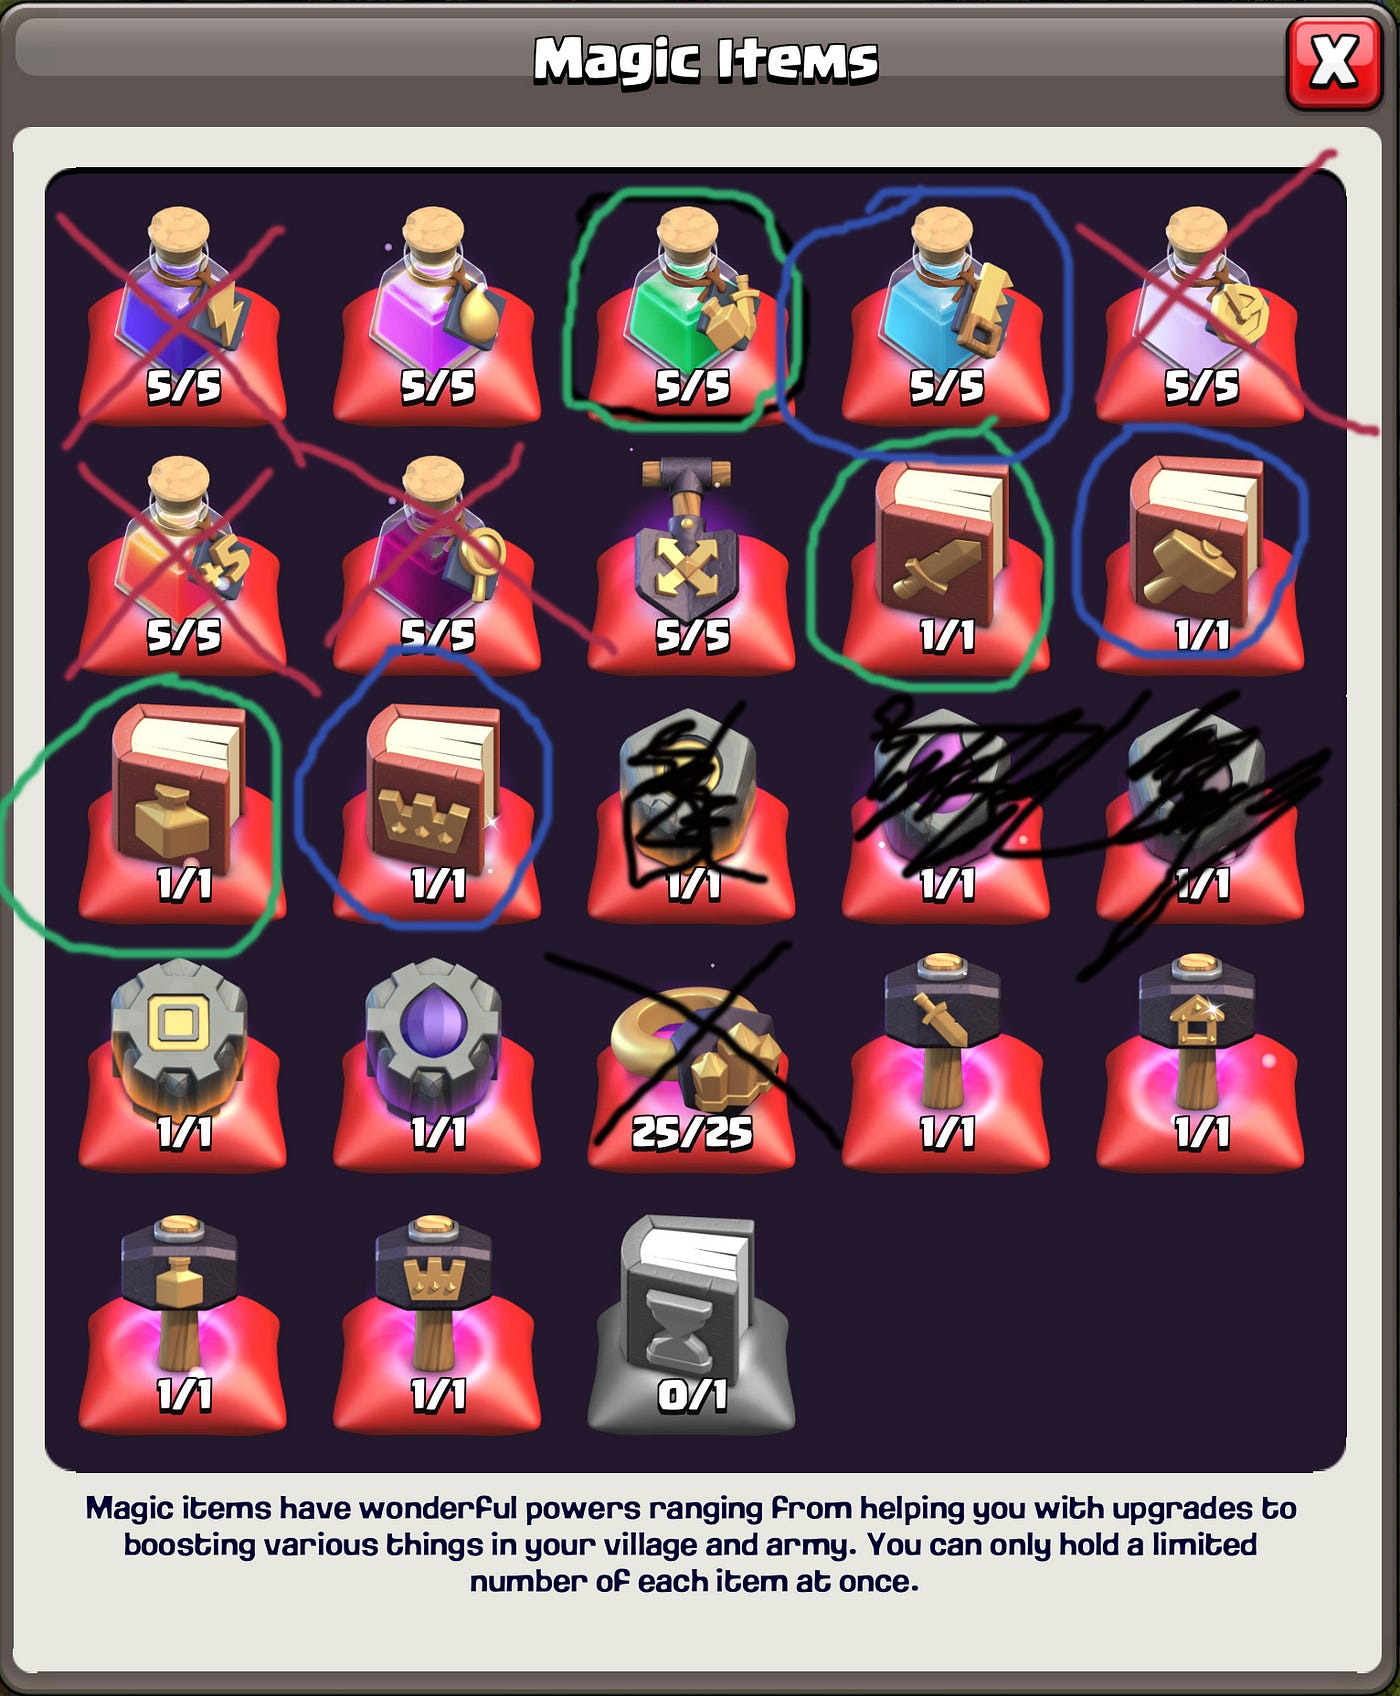 rate the clash royale deck (6000 trophies), Page 2